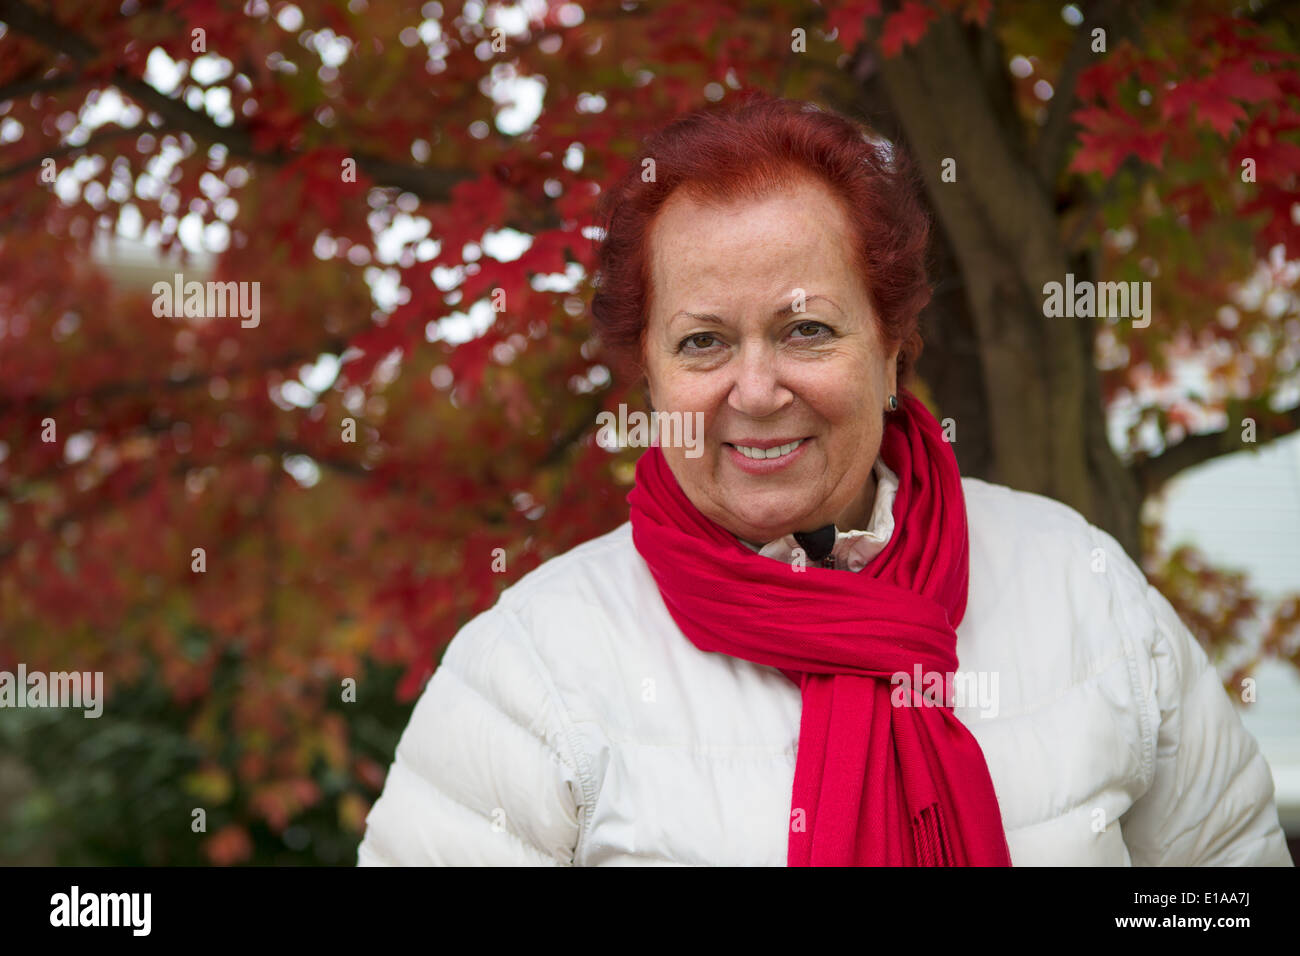 Red hair senior lady looking at you happily and trustfully with her red scarf and white coat under the tree with red falling lea Stock Photo